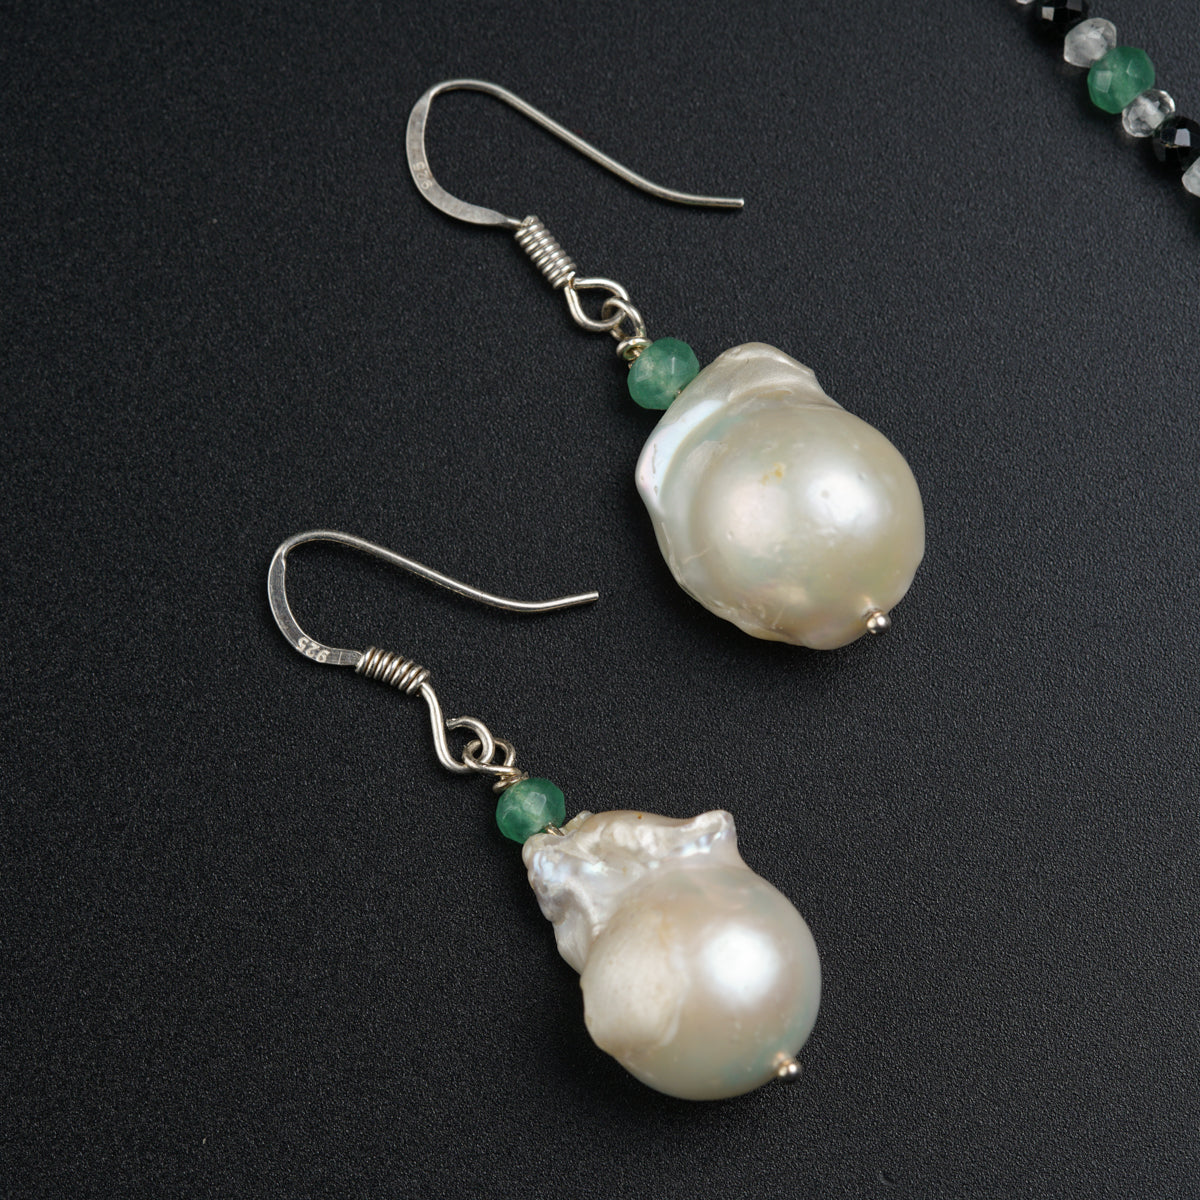 a pair of earrings with pearls and green beads